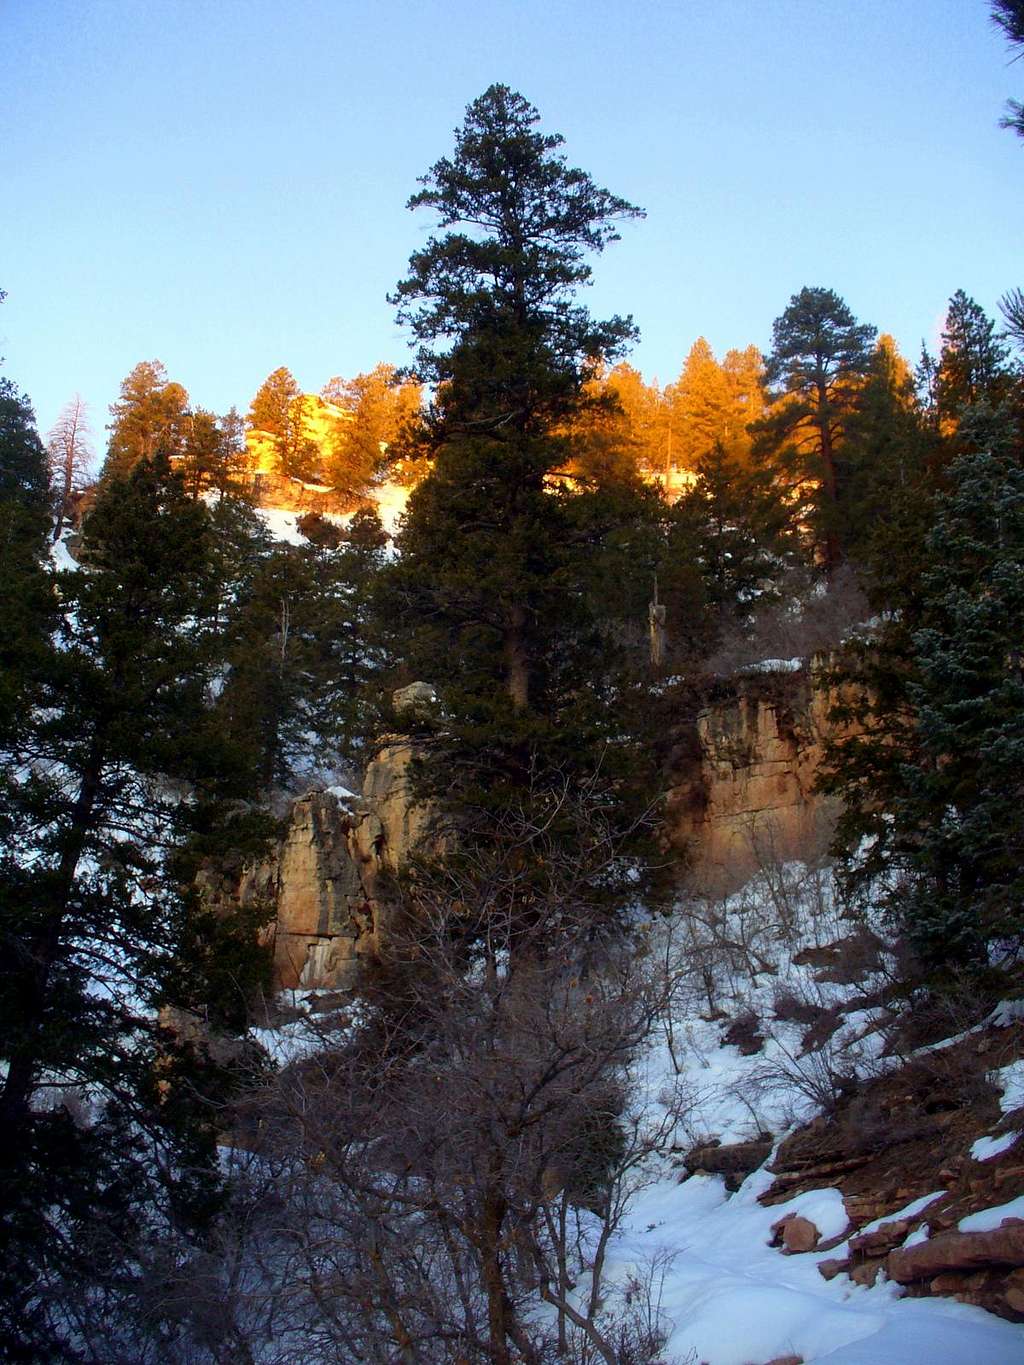 First rays of wintry dawn on N Kaibab